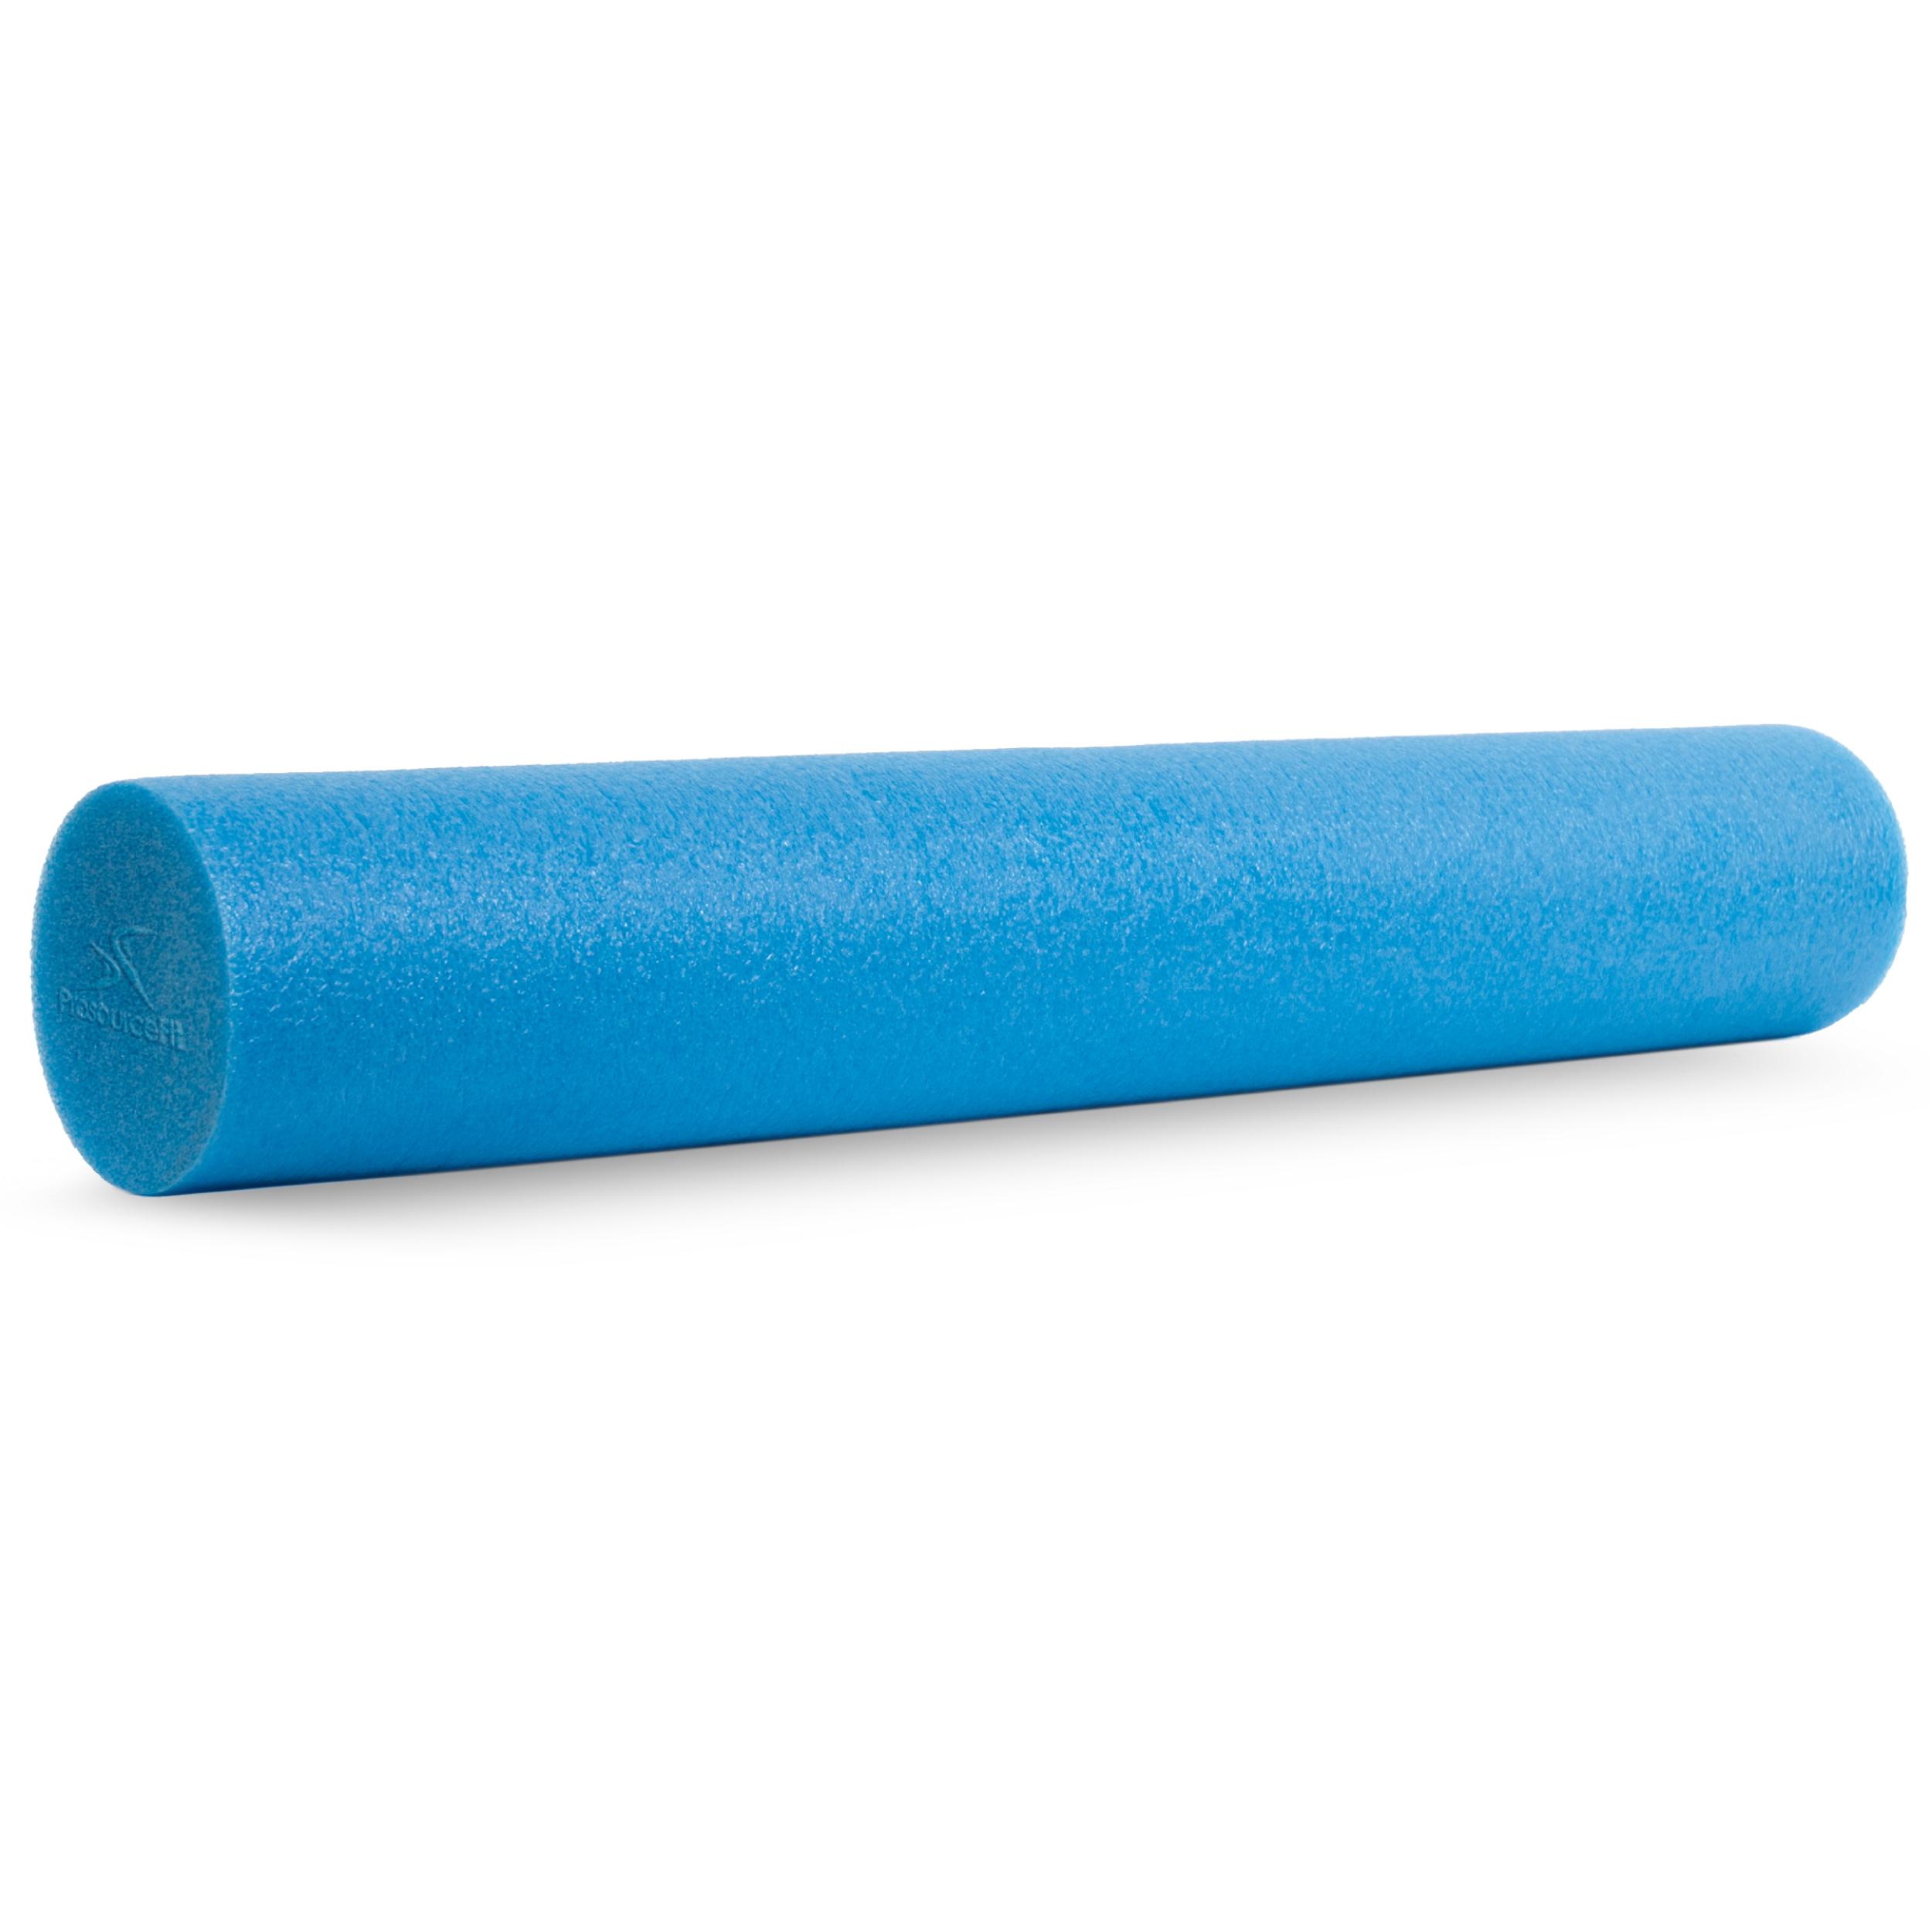 ProsourceFit Flex Foam Rollers, Full and Half, 36"L or 12"L for Muscle Therapy (MFR), Core Stabilization and Balance Exercises - image 1 of 7